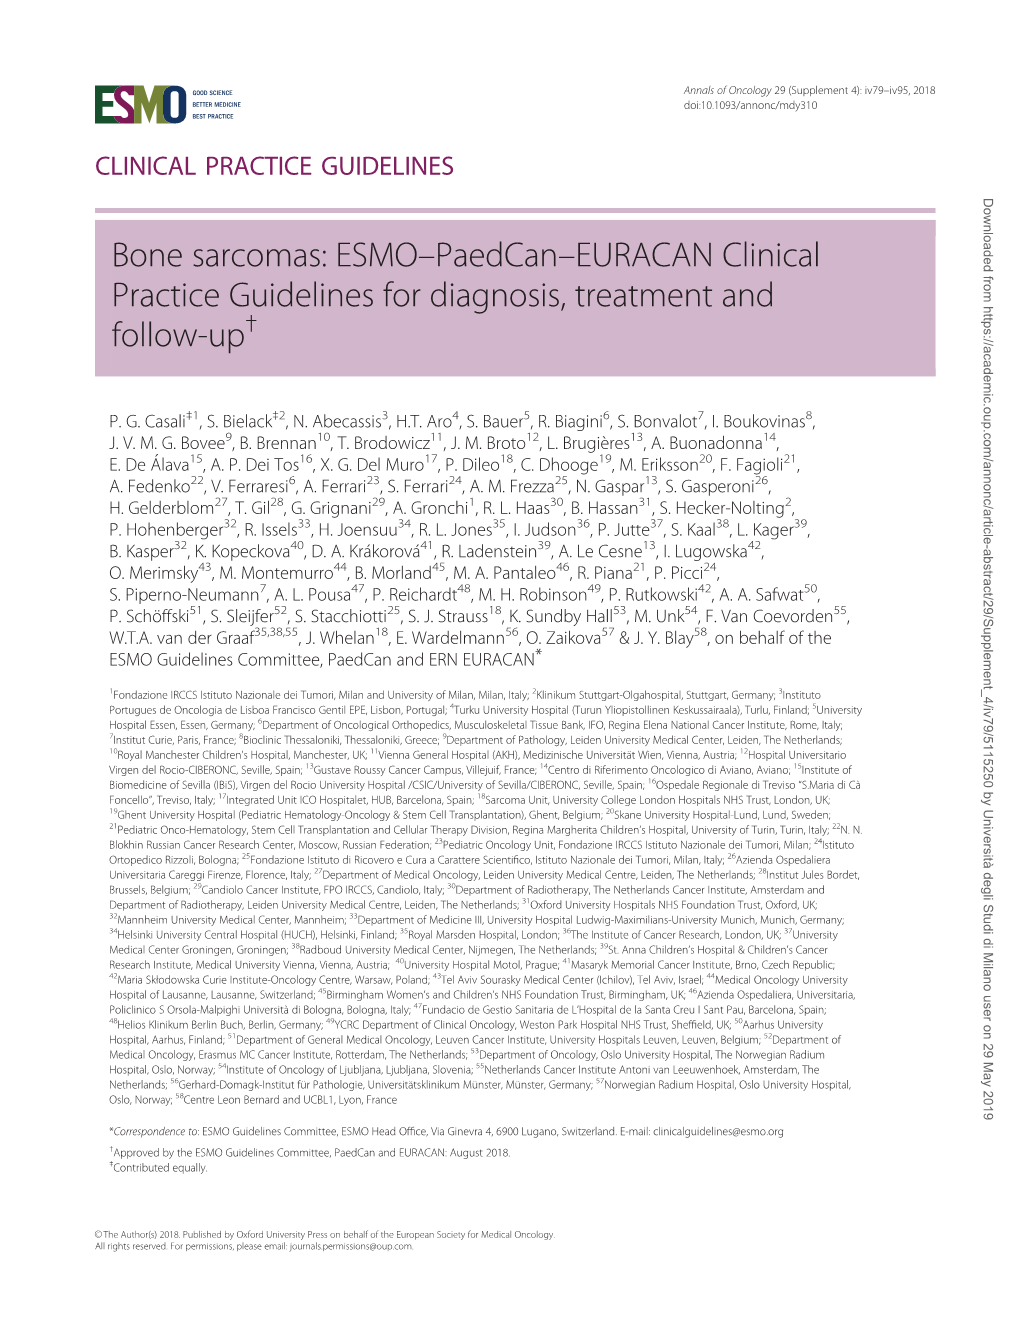 ESMO–Paedcan–EURACAN Clinical Practice Guidelines for Diagnosis, Treatment and Follow-Up†